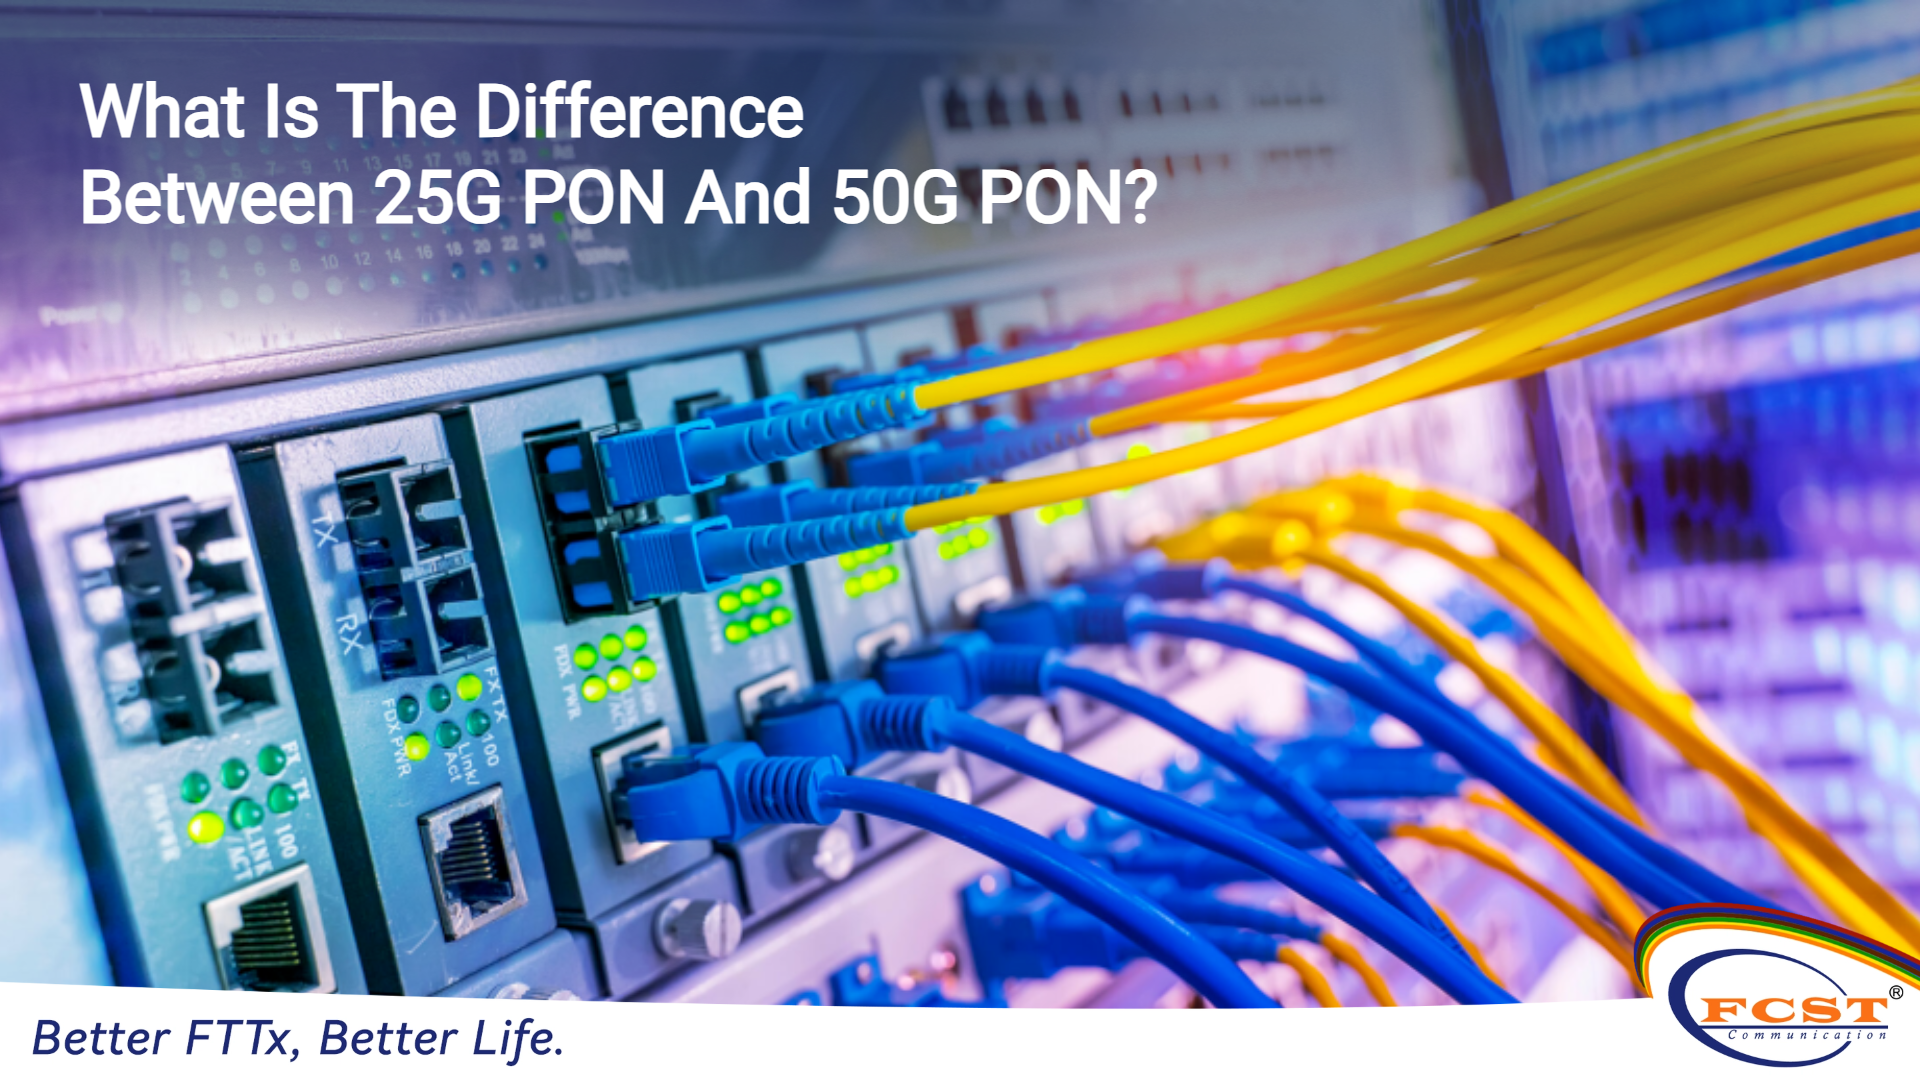 What Is The Difference Between 25G PON And 50G PON?